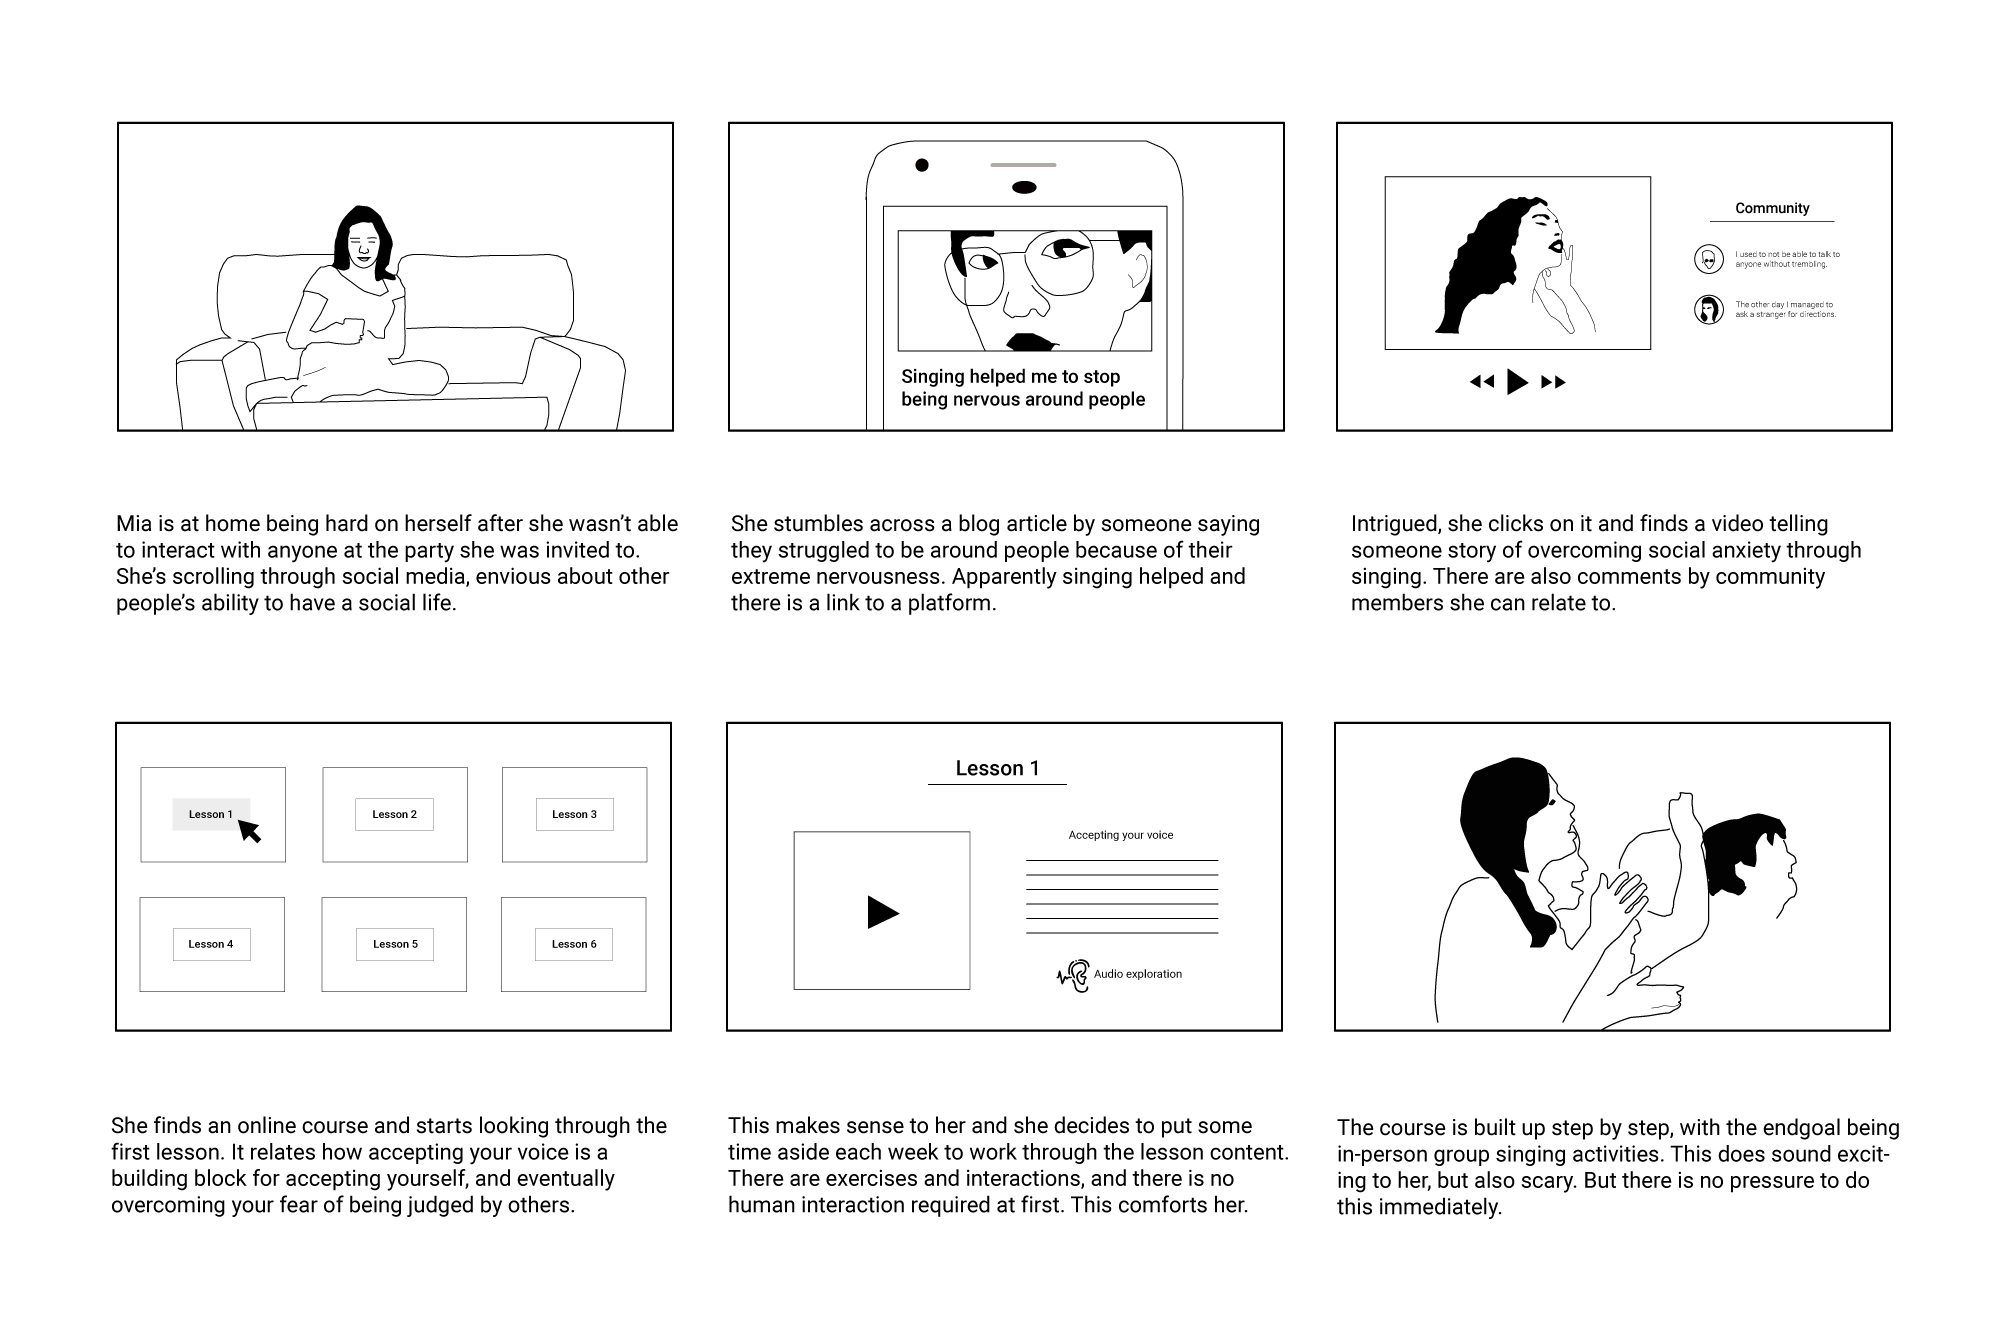 A storyboard describing how the learner might find the platform